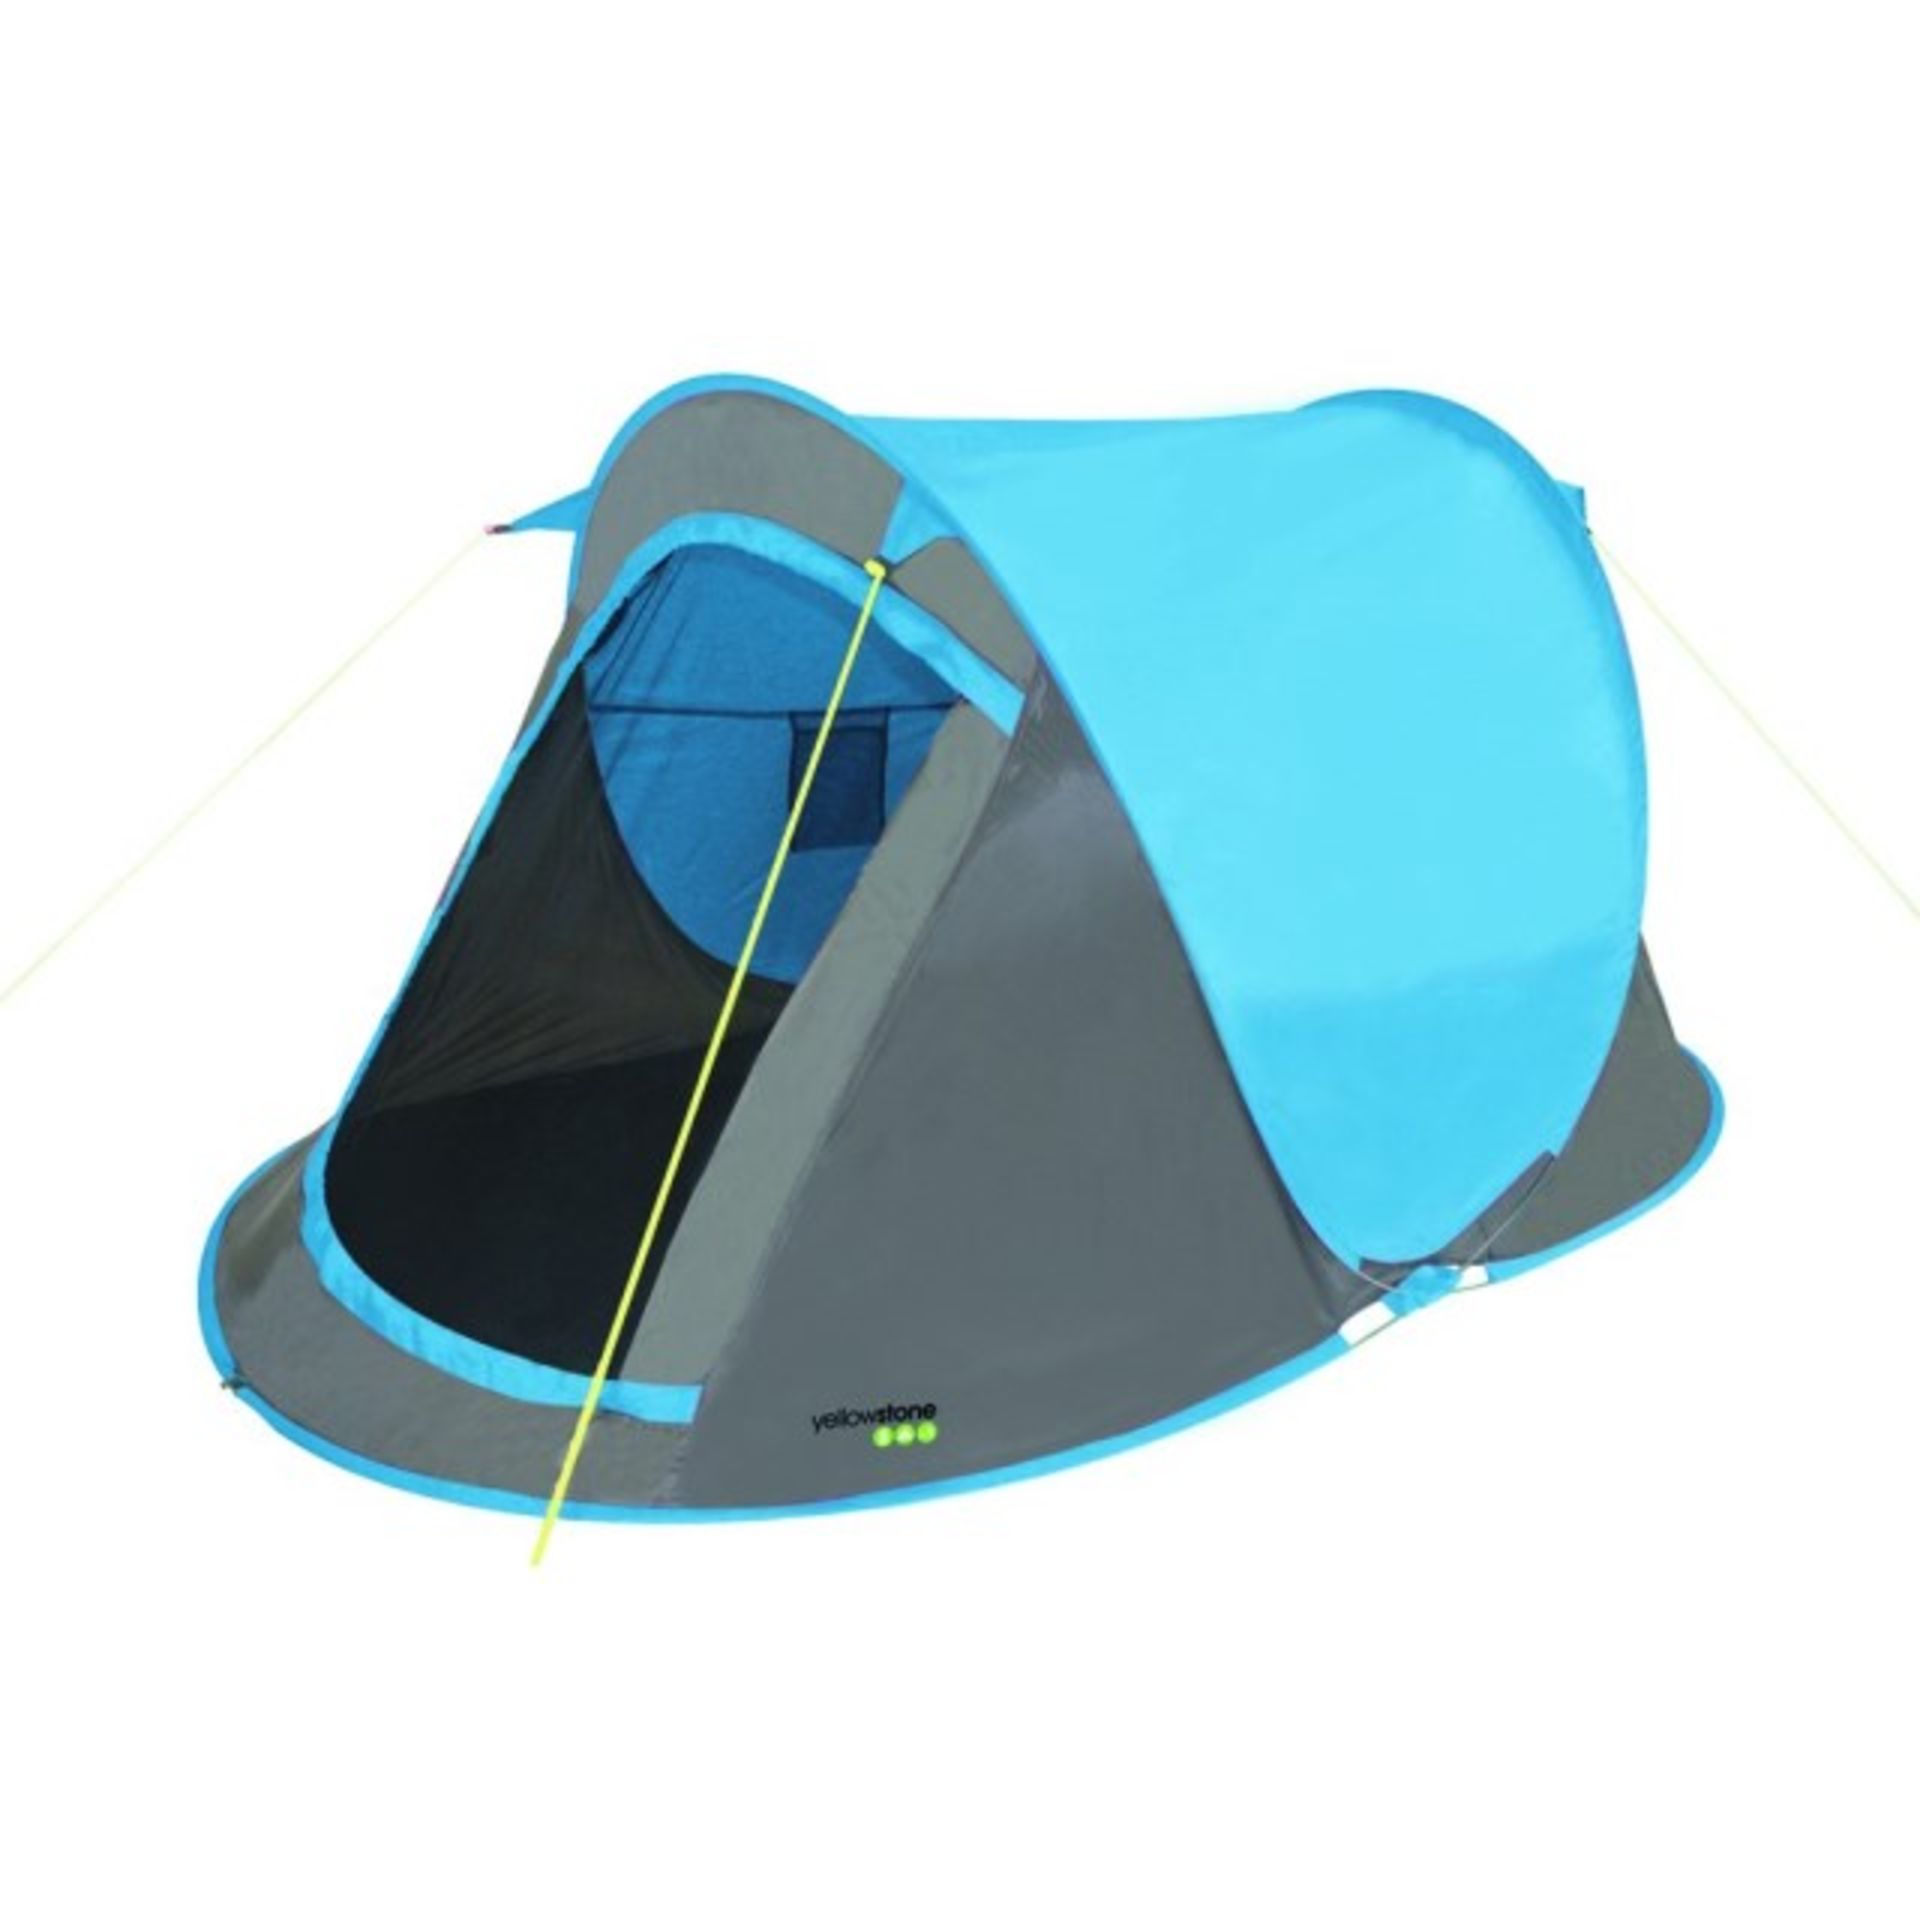 V Brand New Blue Fast Pitch Pop Up 2 Man Tent with Hi Viz Guy Ropes X 8 Bid price to be multiplied